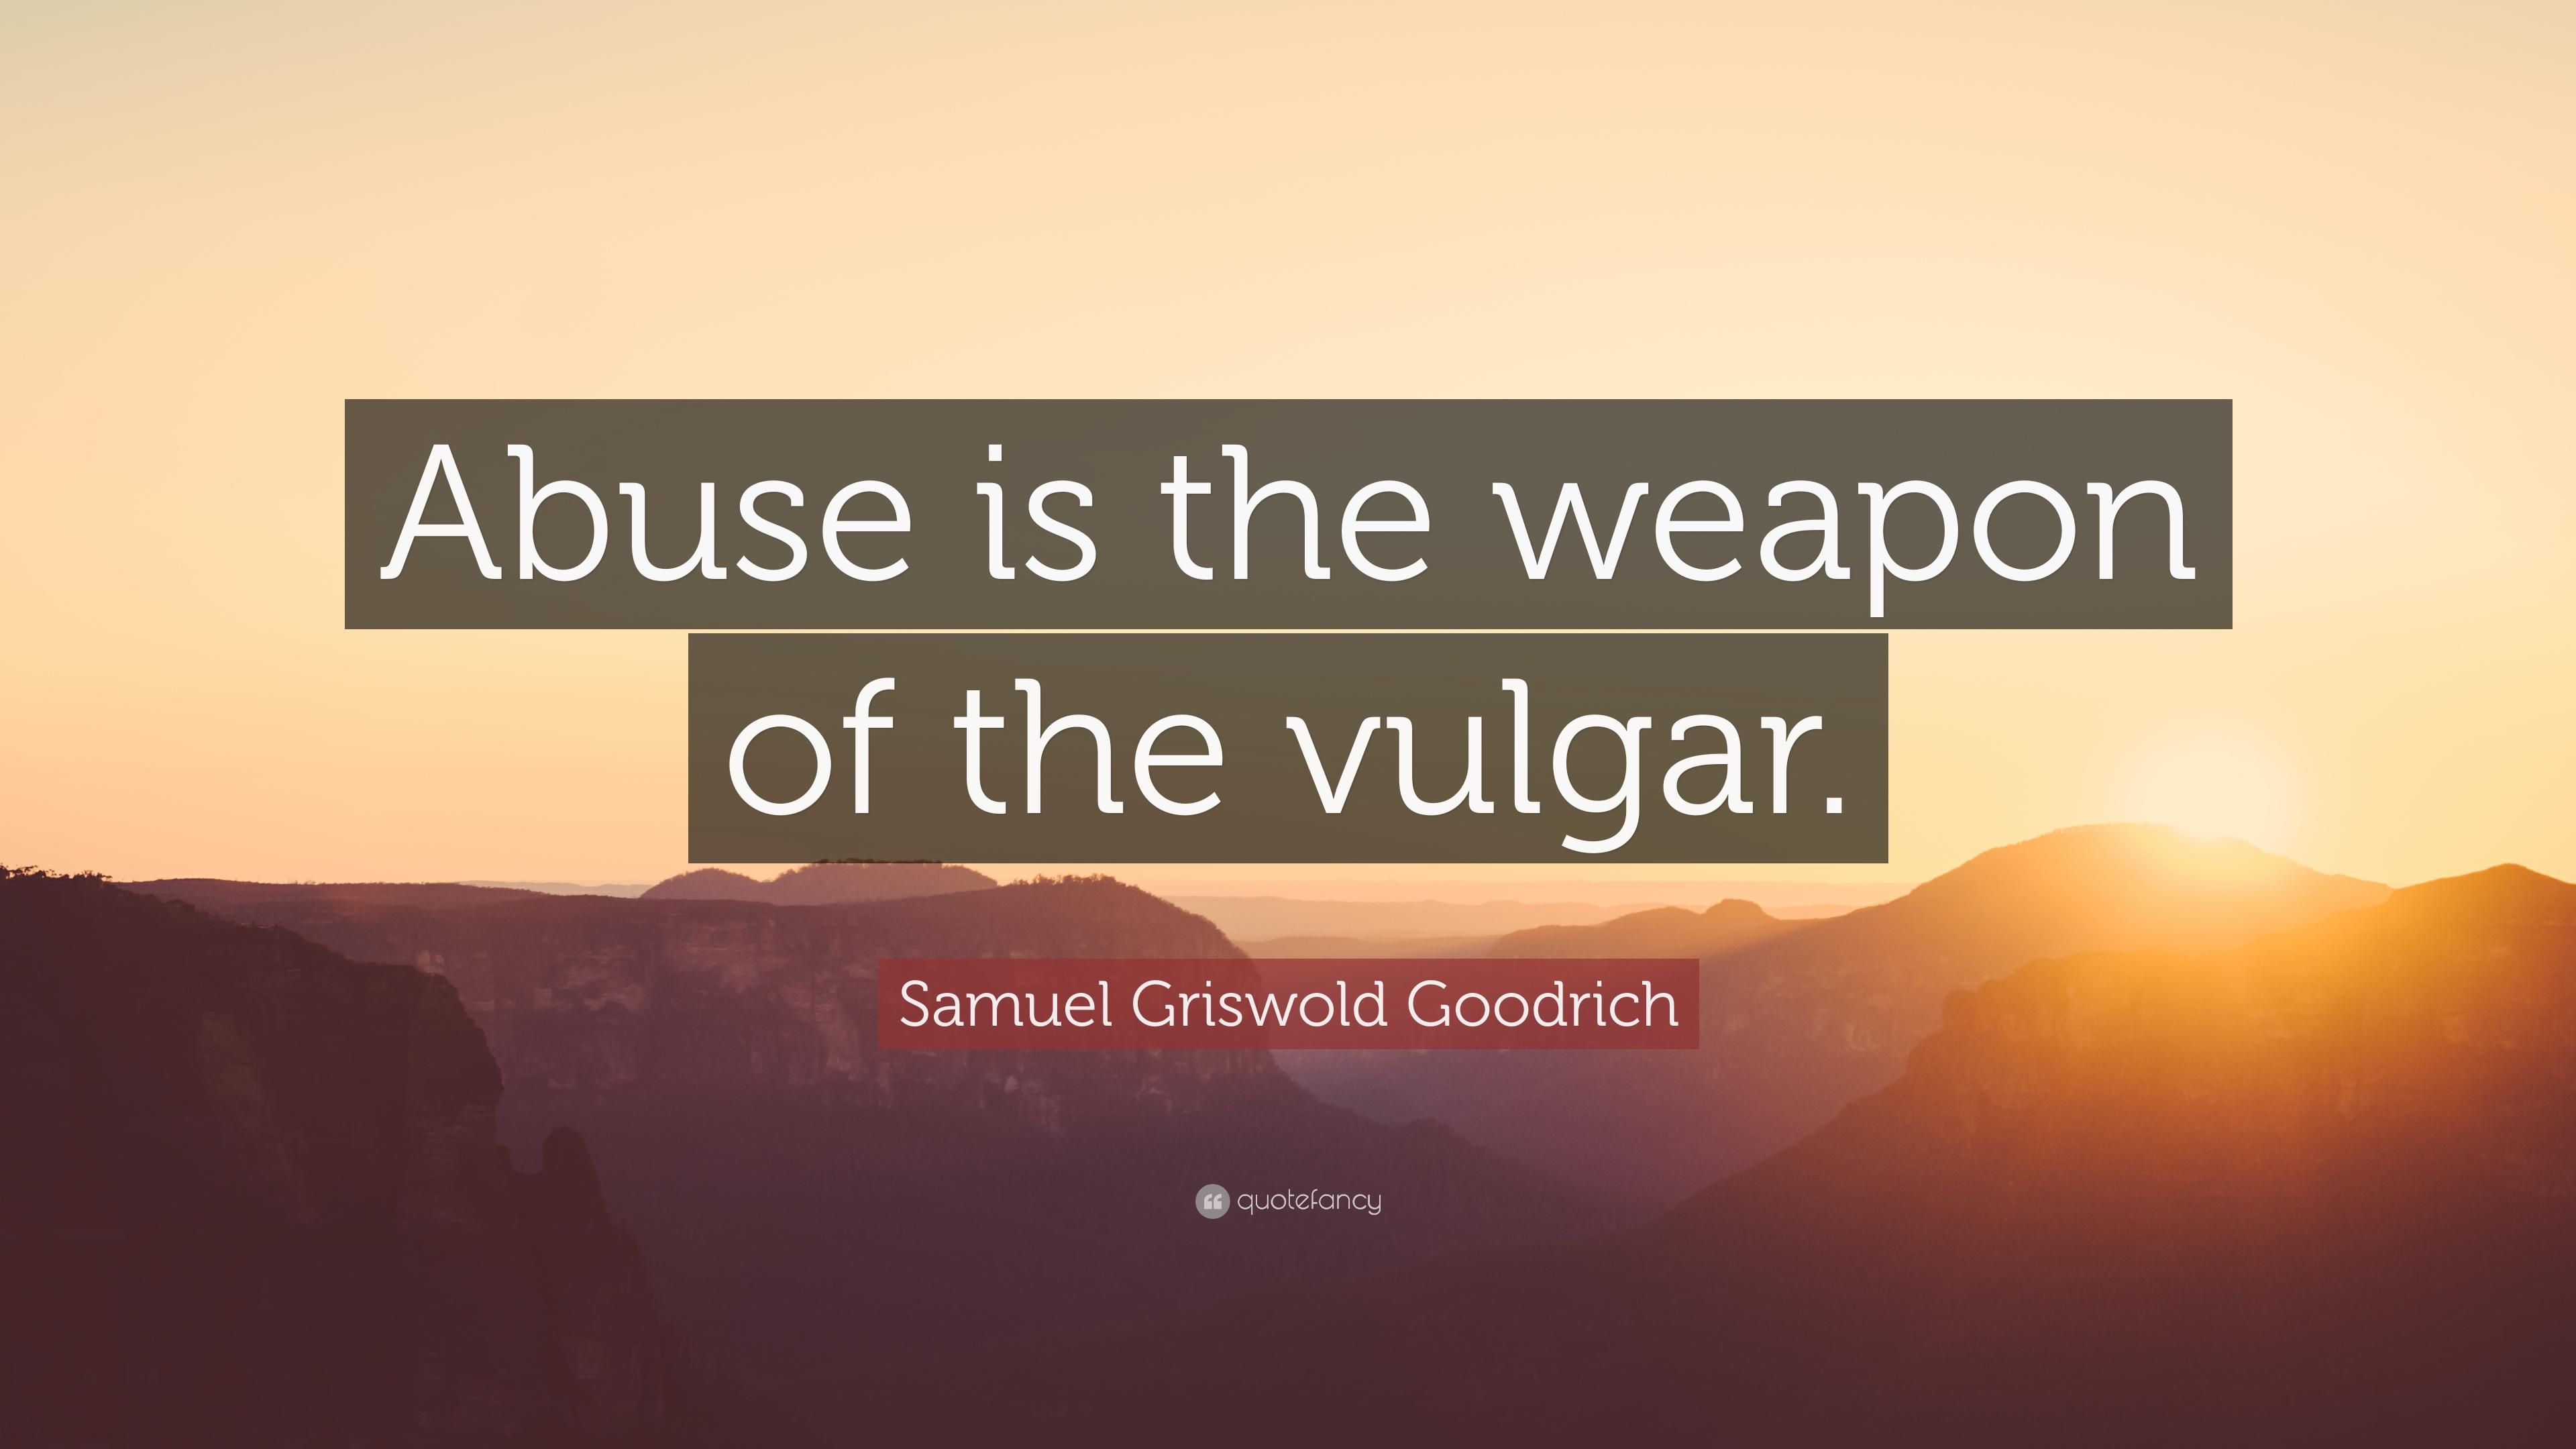 Samuel Griswold Goodrich Quote: “Abuse is the weapon of the vulgar